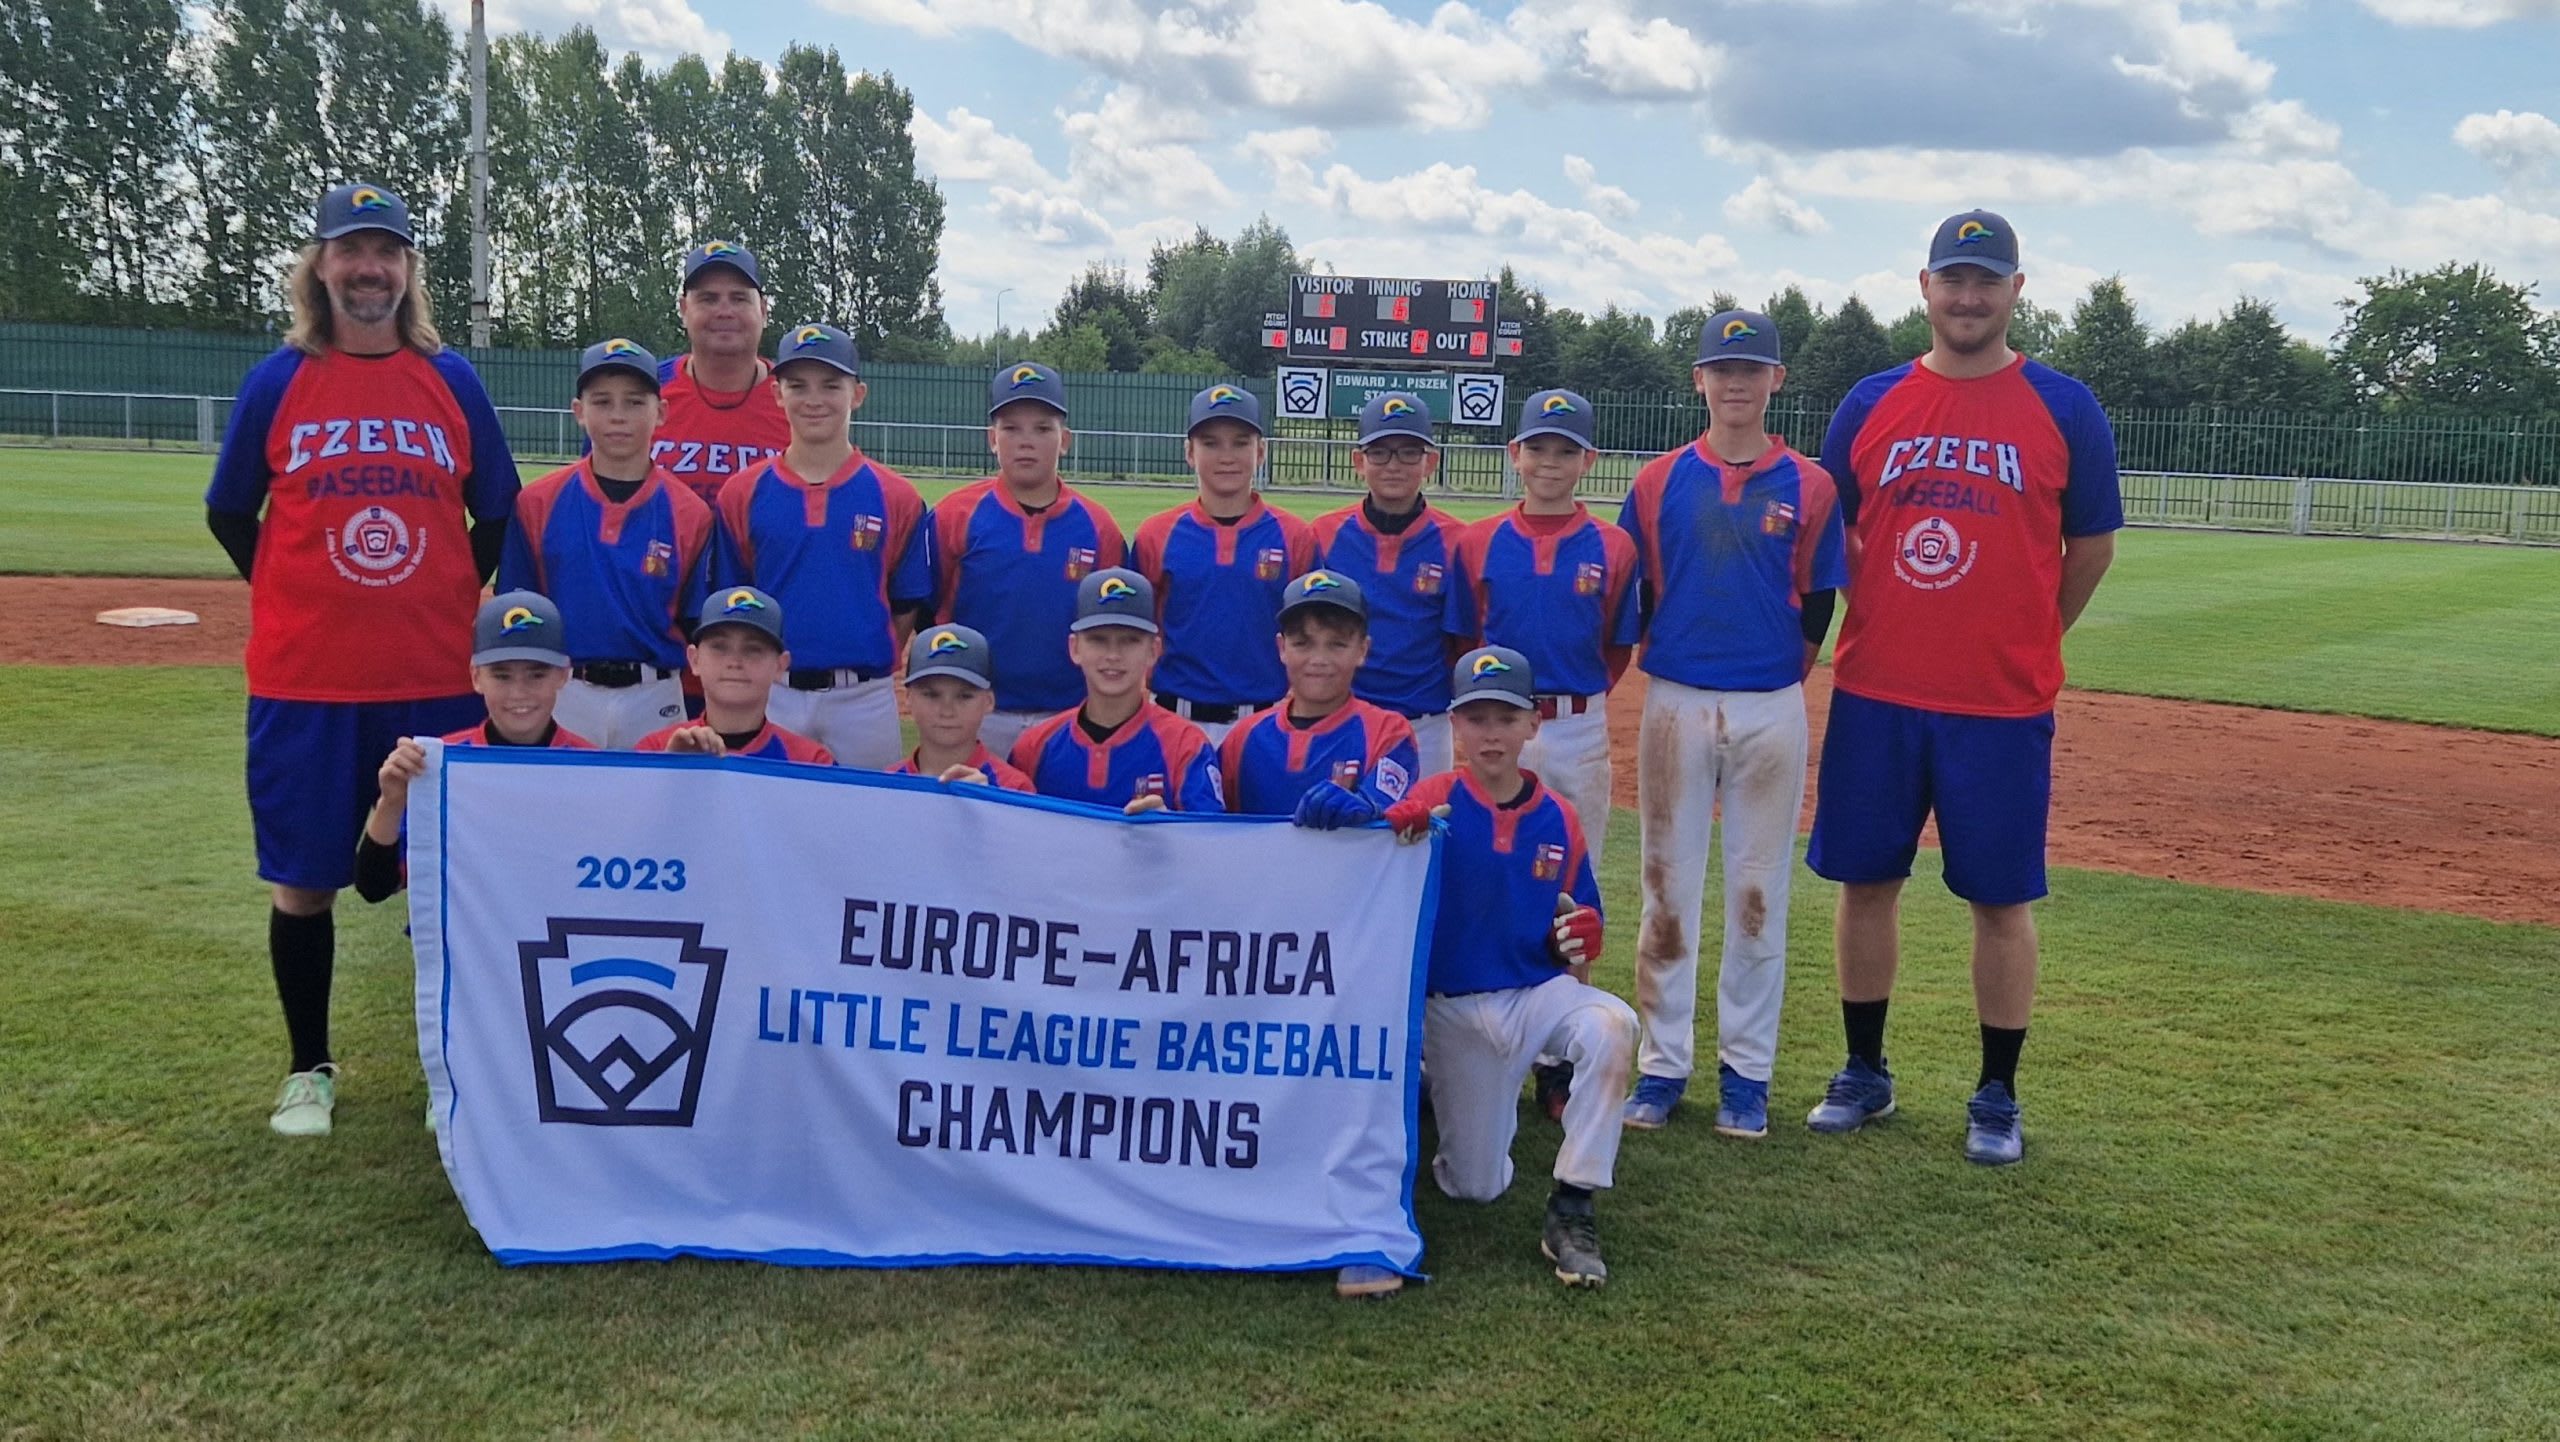 2023 Europe and Africa Region Champions - LLB